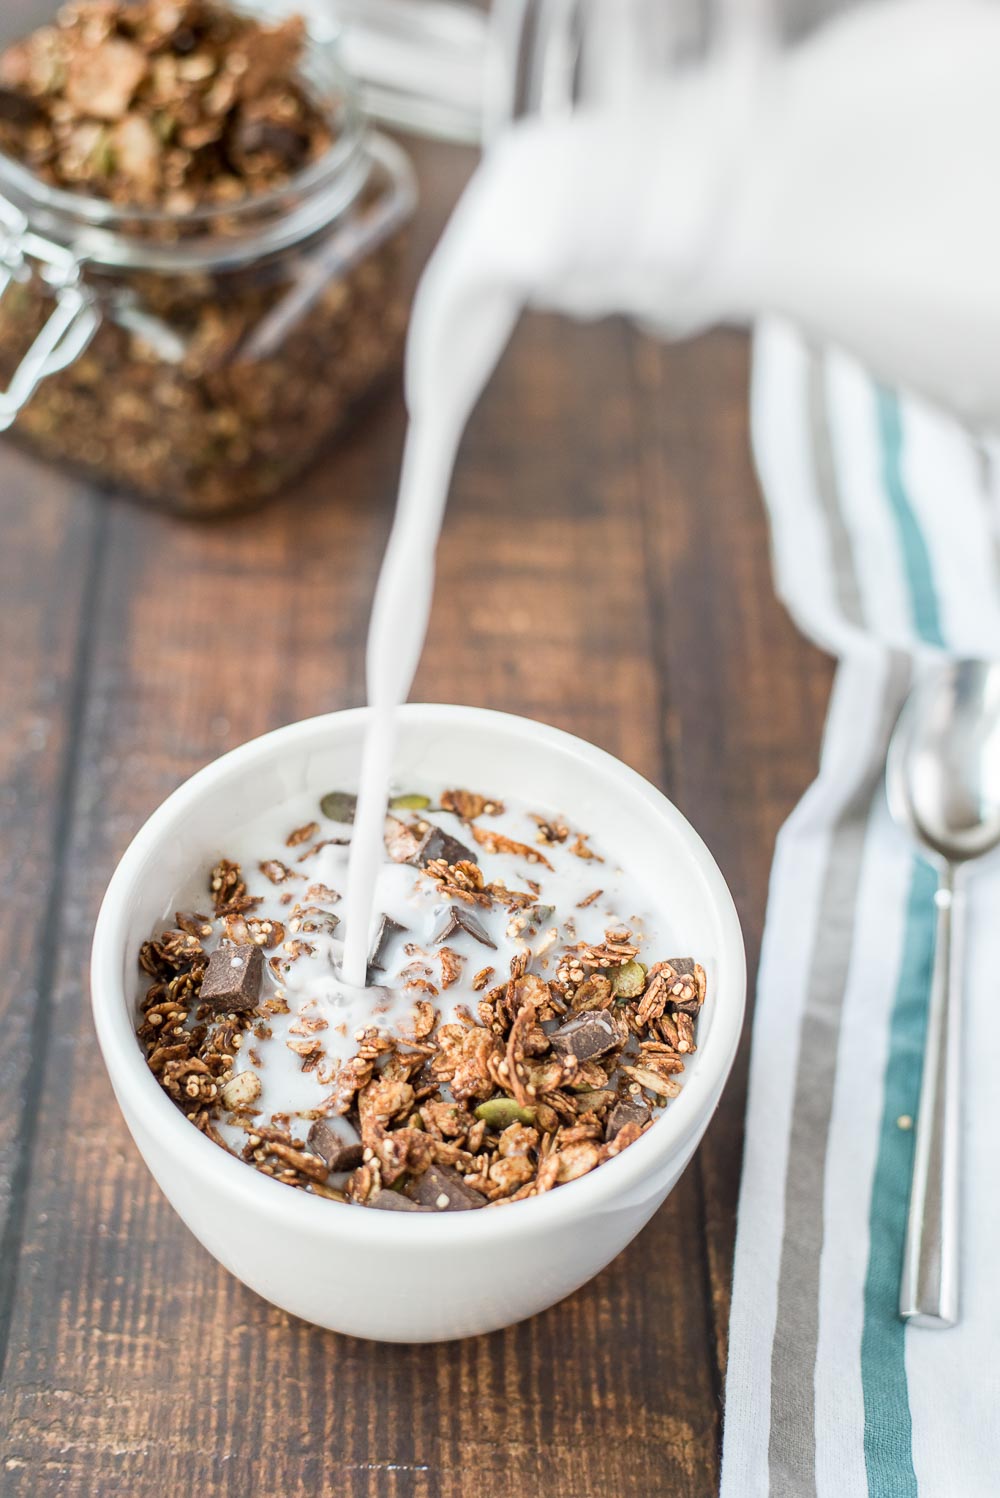 Forget the brands at the store! This Gluten Free Dark Chocolate Granola is easy, delicious, and even more healthy!